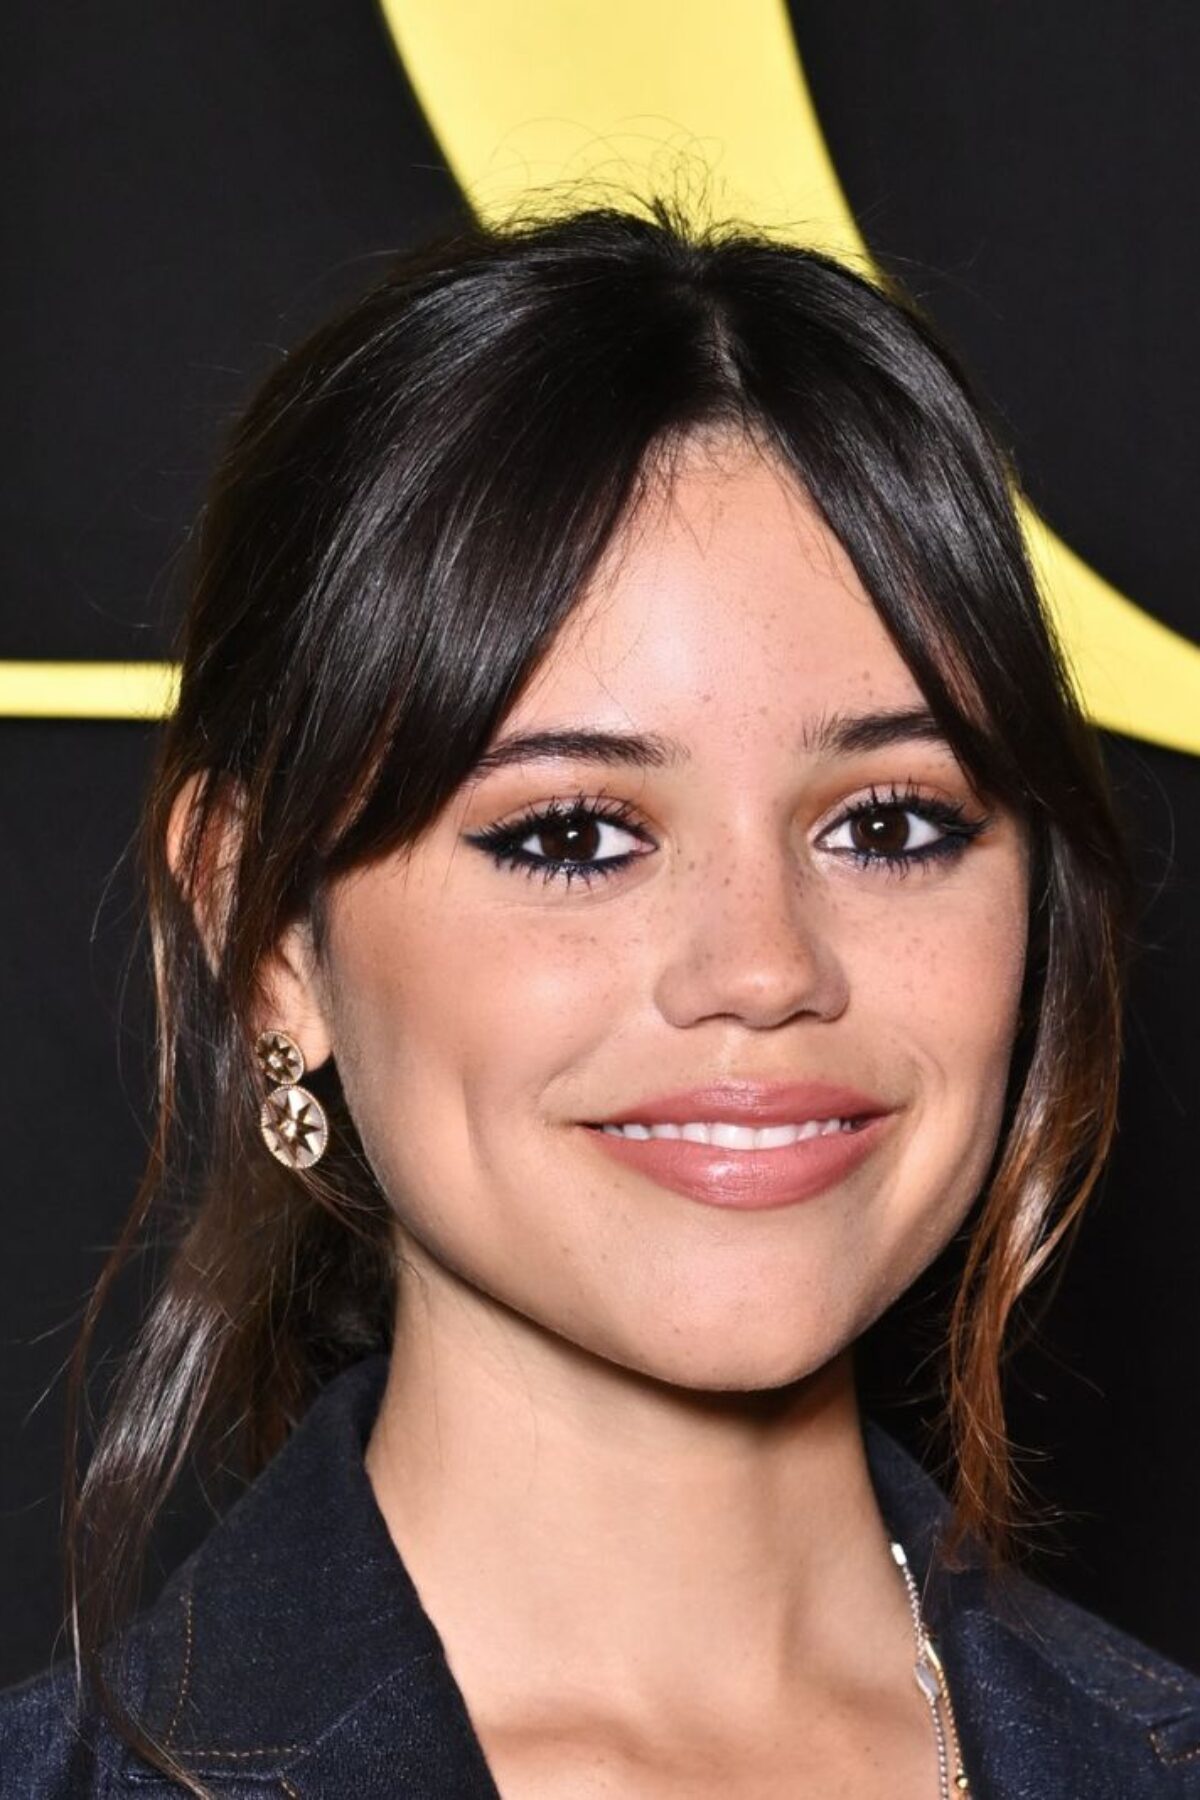 PARIS, FRANCE - SEPTEMBER 26: (EDITORIAL USE ONLY - For Non-Editorial use please seek approval from Fashion House) Jenna Ortega attends the Christian Dior Womenswear Spring/Summer 2024 show as part of Paris Fashion Week on September 26, 2023 in Paris, France. (Photo by Stephane Cardinale - Corbis/Corbis via Getty Images)